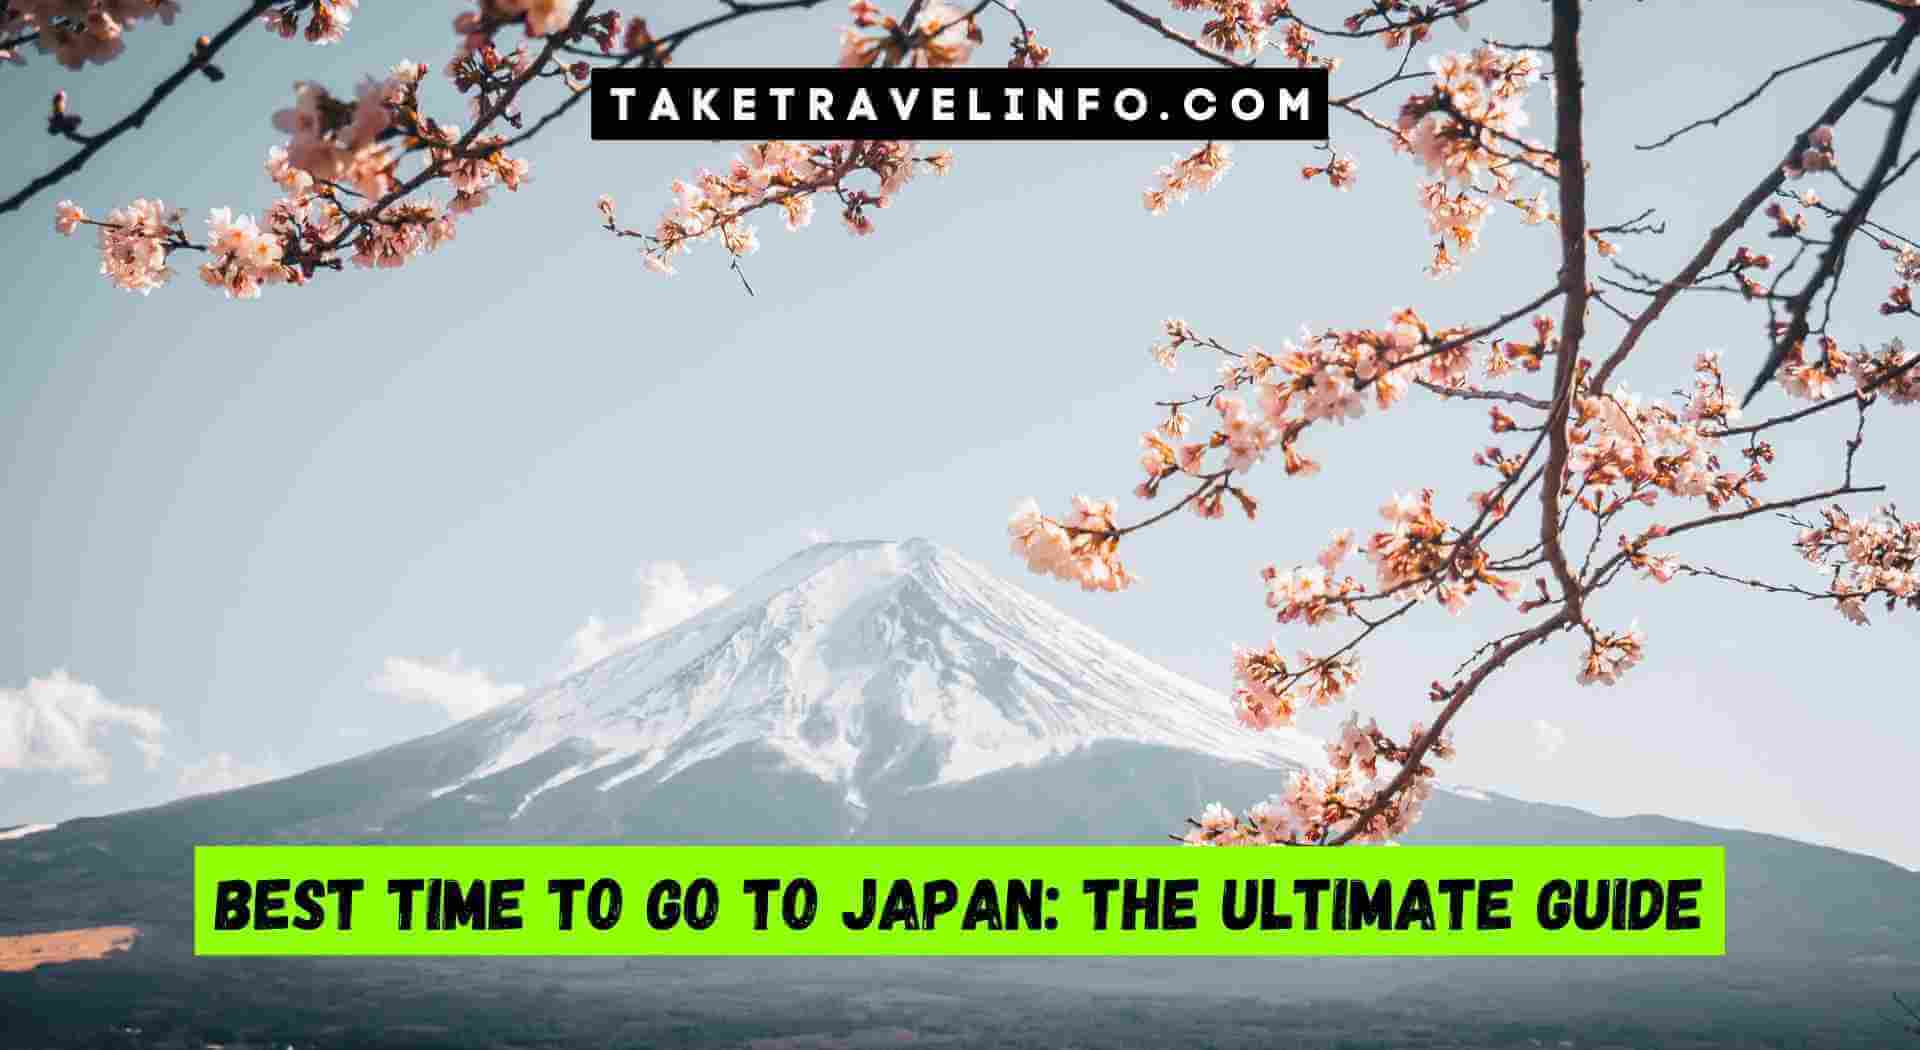 Best Time to Go to Japan: The Ultimate Guide